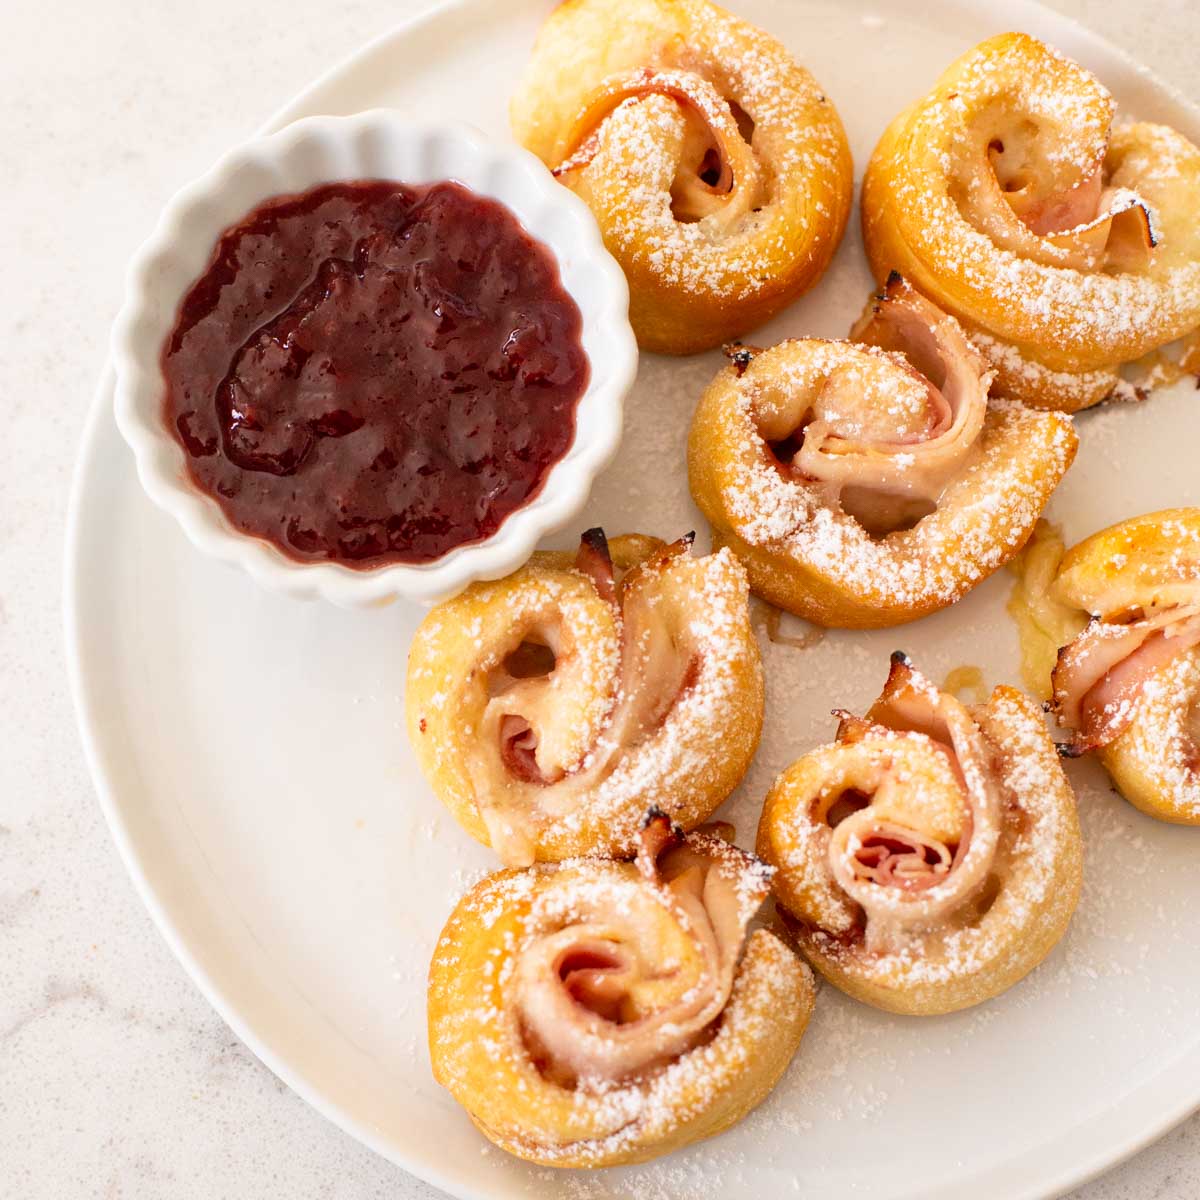 A plate filled with Monte Cristo crescent rolls and a little cup of strawberry jam for serving.